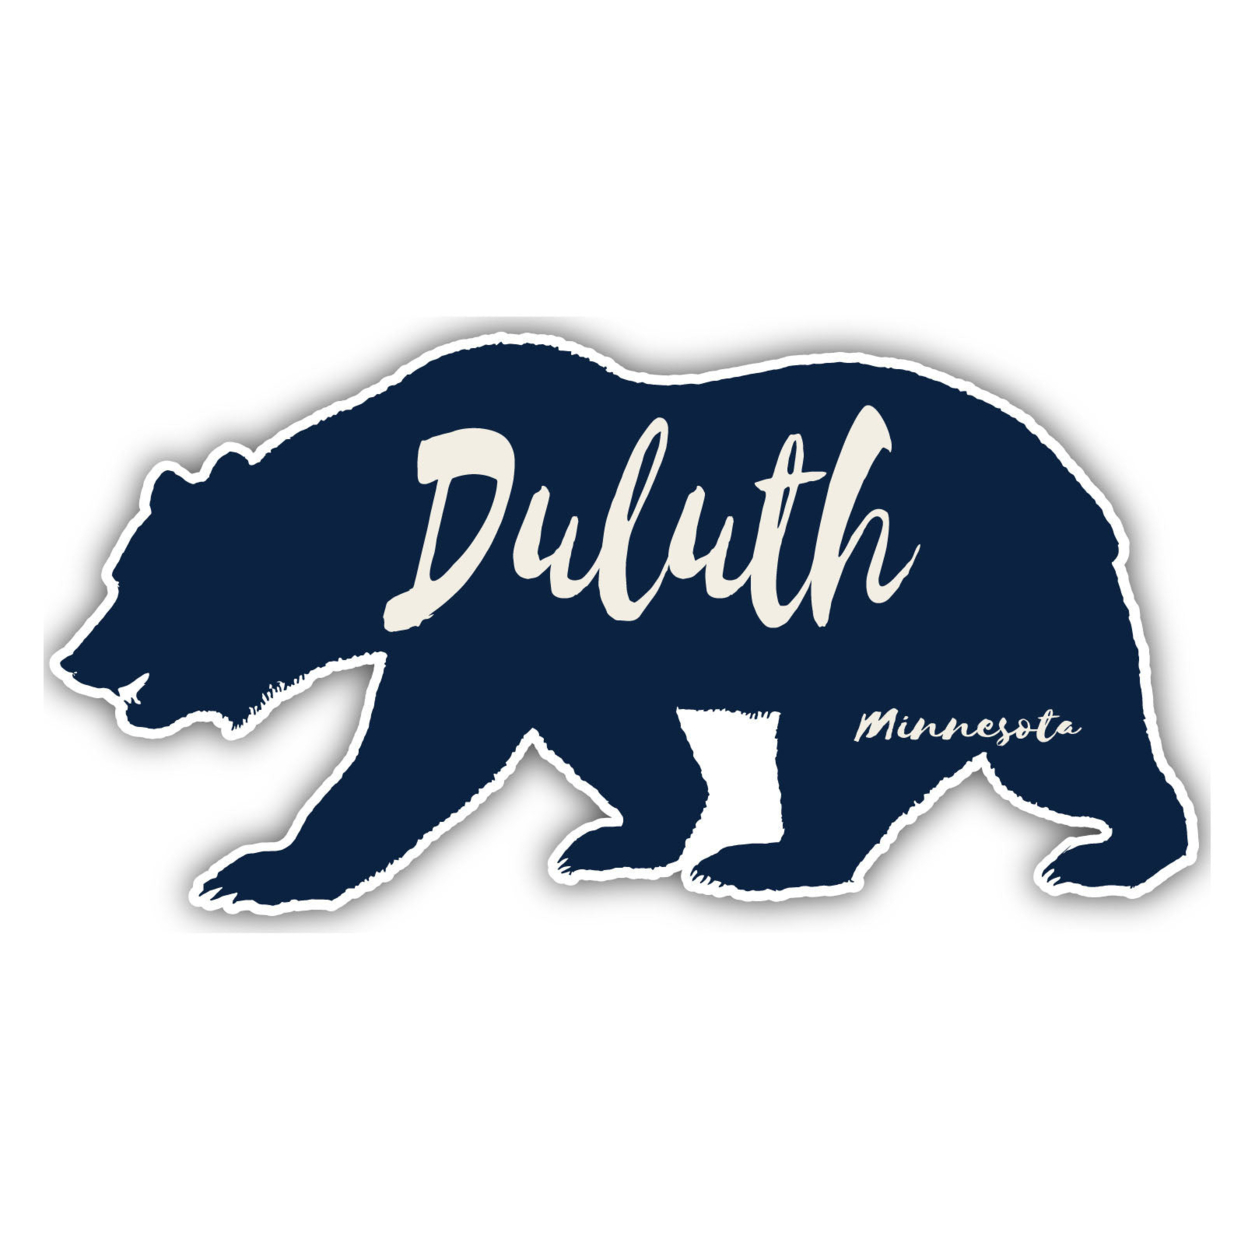 Duluth Minnesota Souvenir Decorative Stickers (Choose Theme And Size) - 4-Pack, 6-Inch, Tent